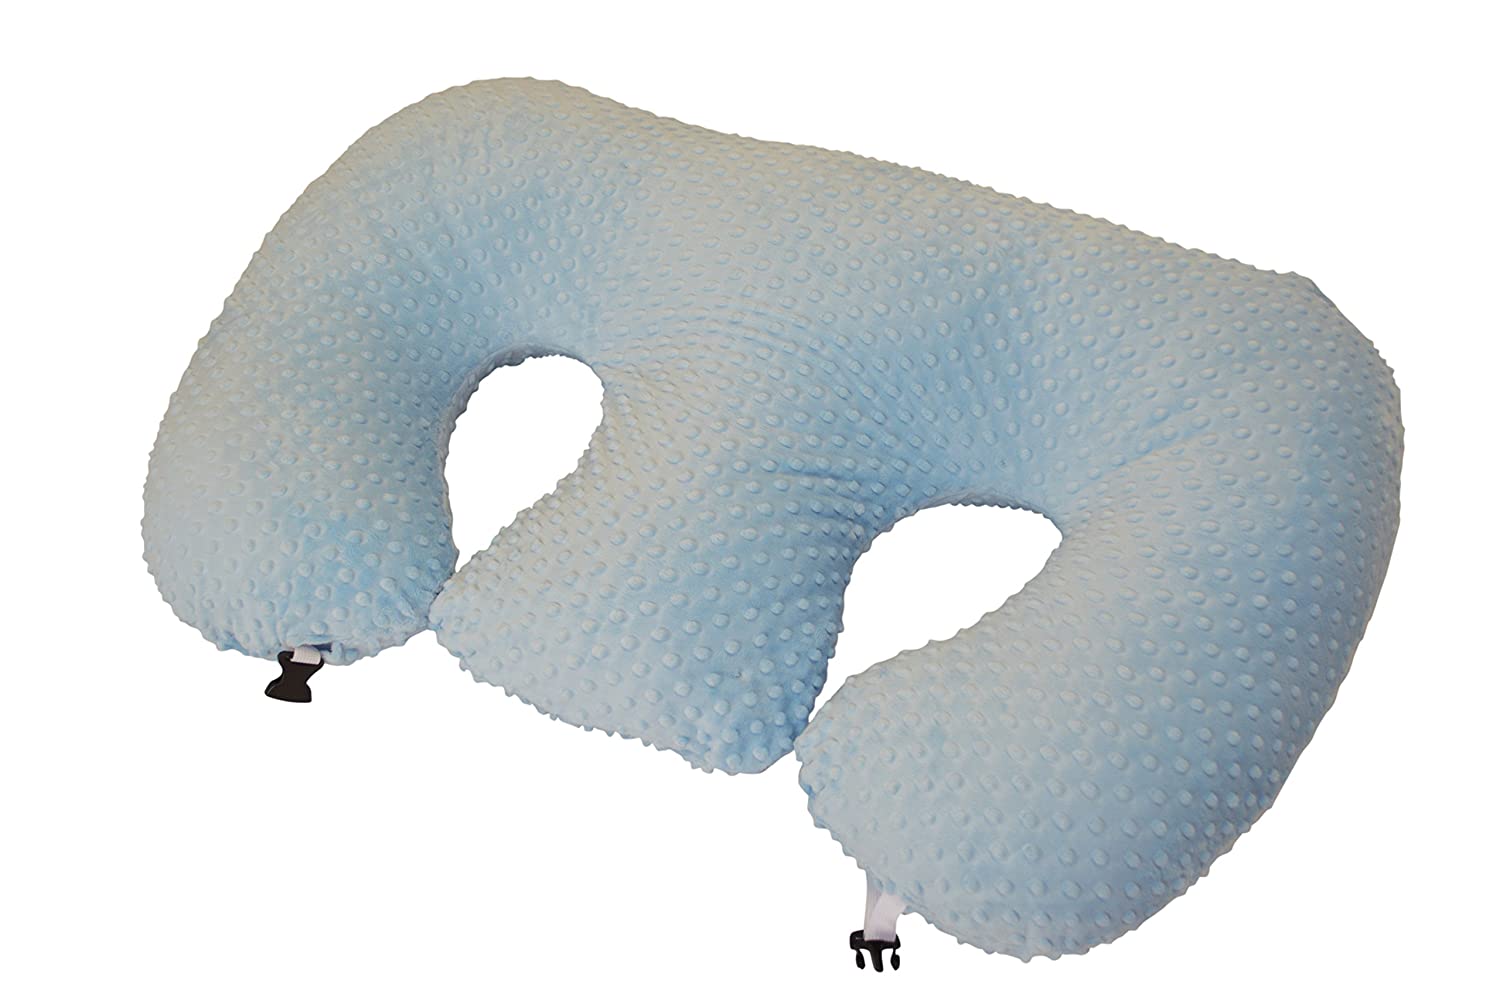 THE TWIN Z PILLOW - BLUE - 6 uses in 1 Twin Pillow ! Breastfeeding, Bottlefeeding, Tummy Time, Reflux